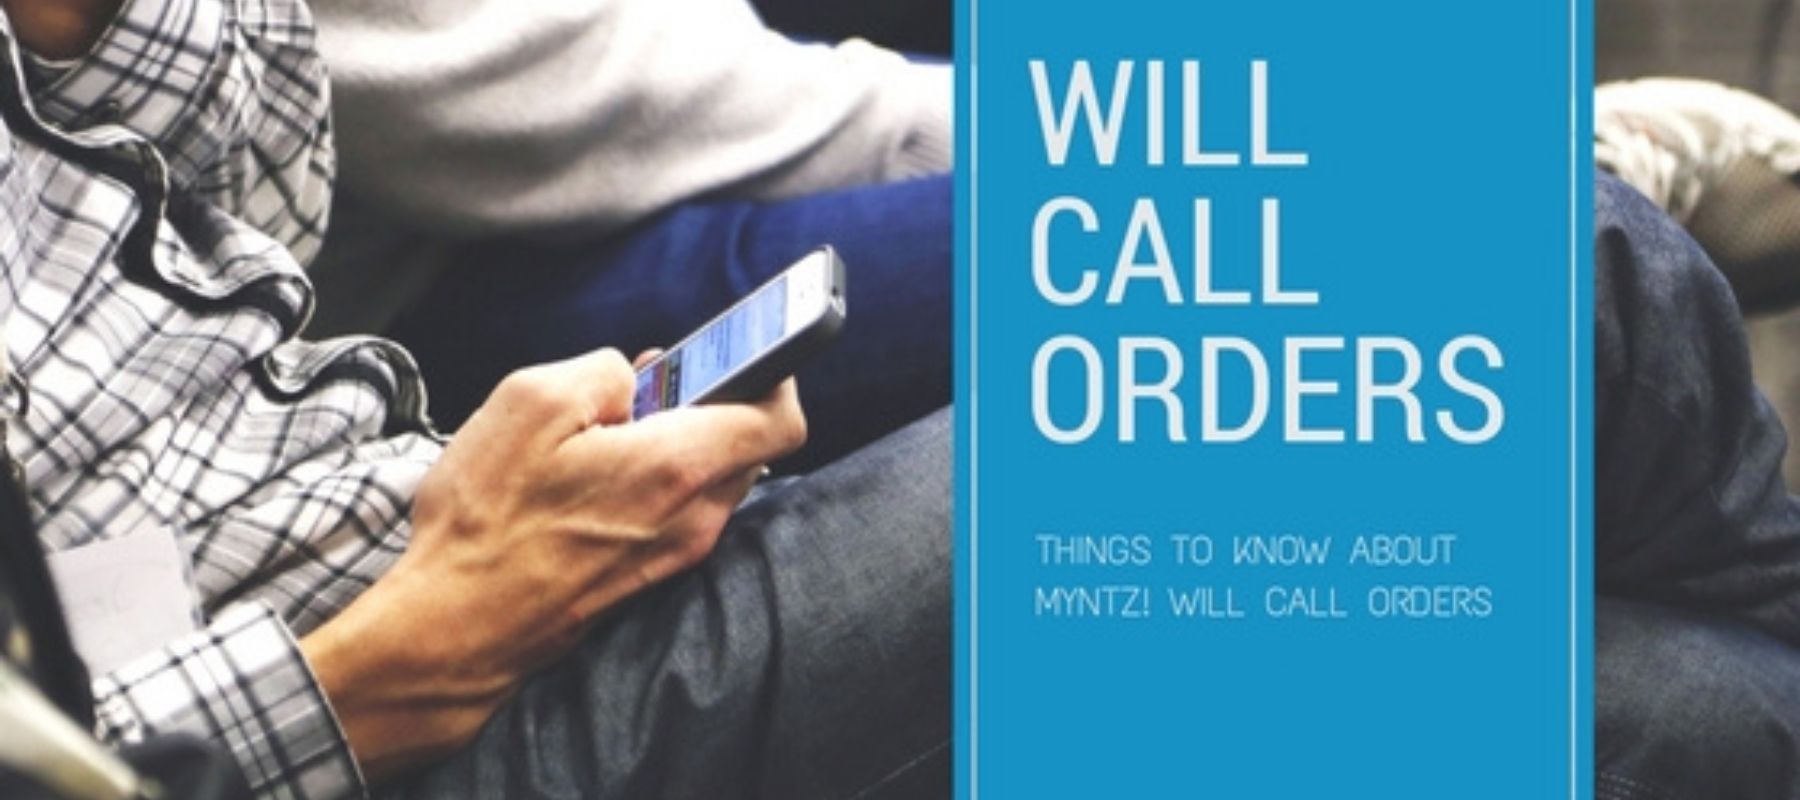 Man checking phone for Myntz! Will-Call orders